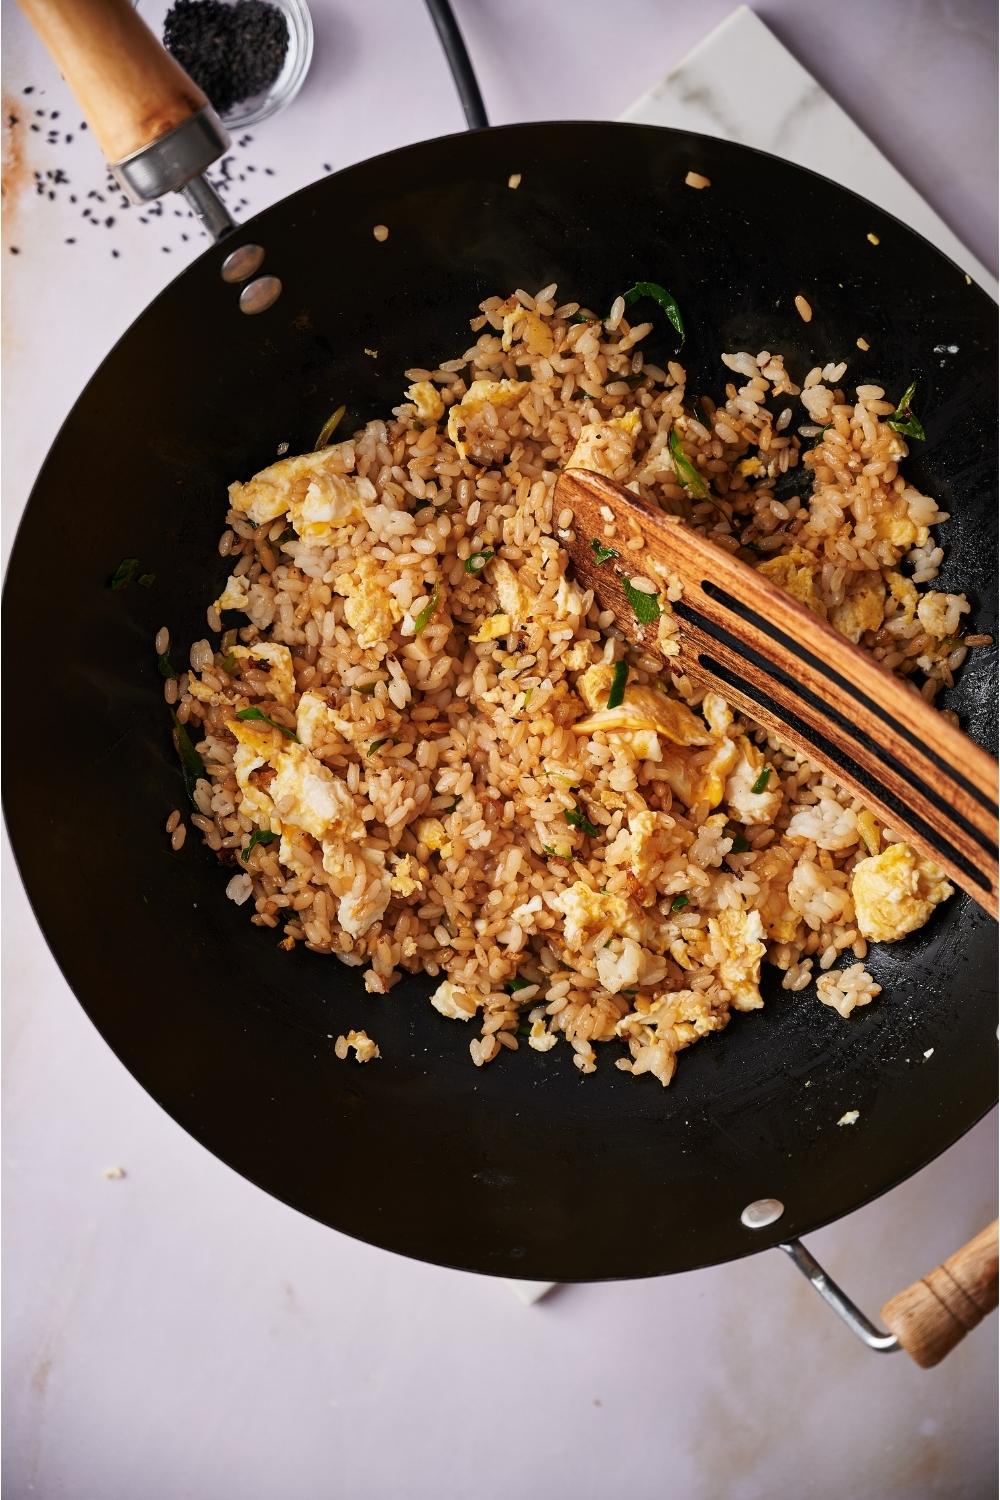 A wok with hibachi fried rice cooking and a spatula mixing the rice together. The wok is on a grey counter. Next to the wok there is a bowl of sesame seeds with seeds spilling out of the bowl.